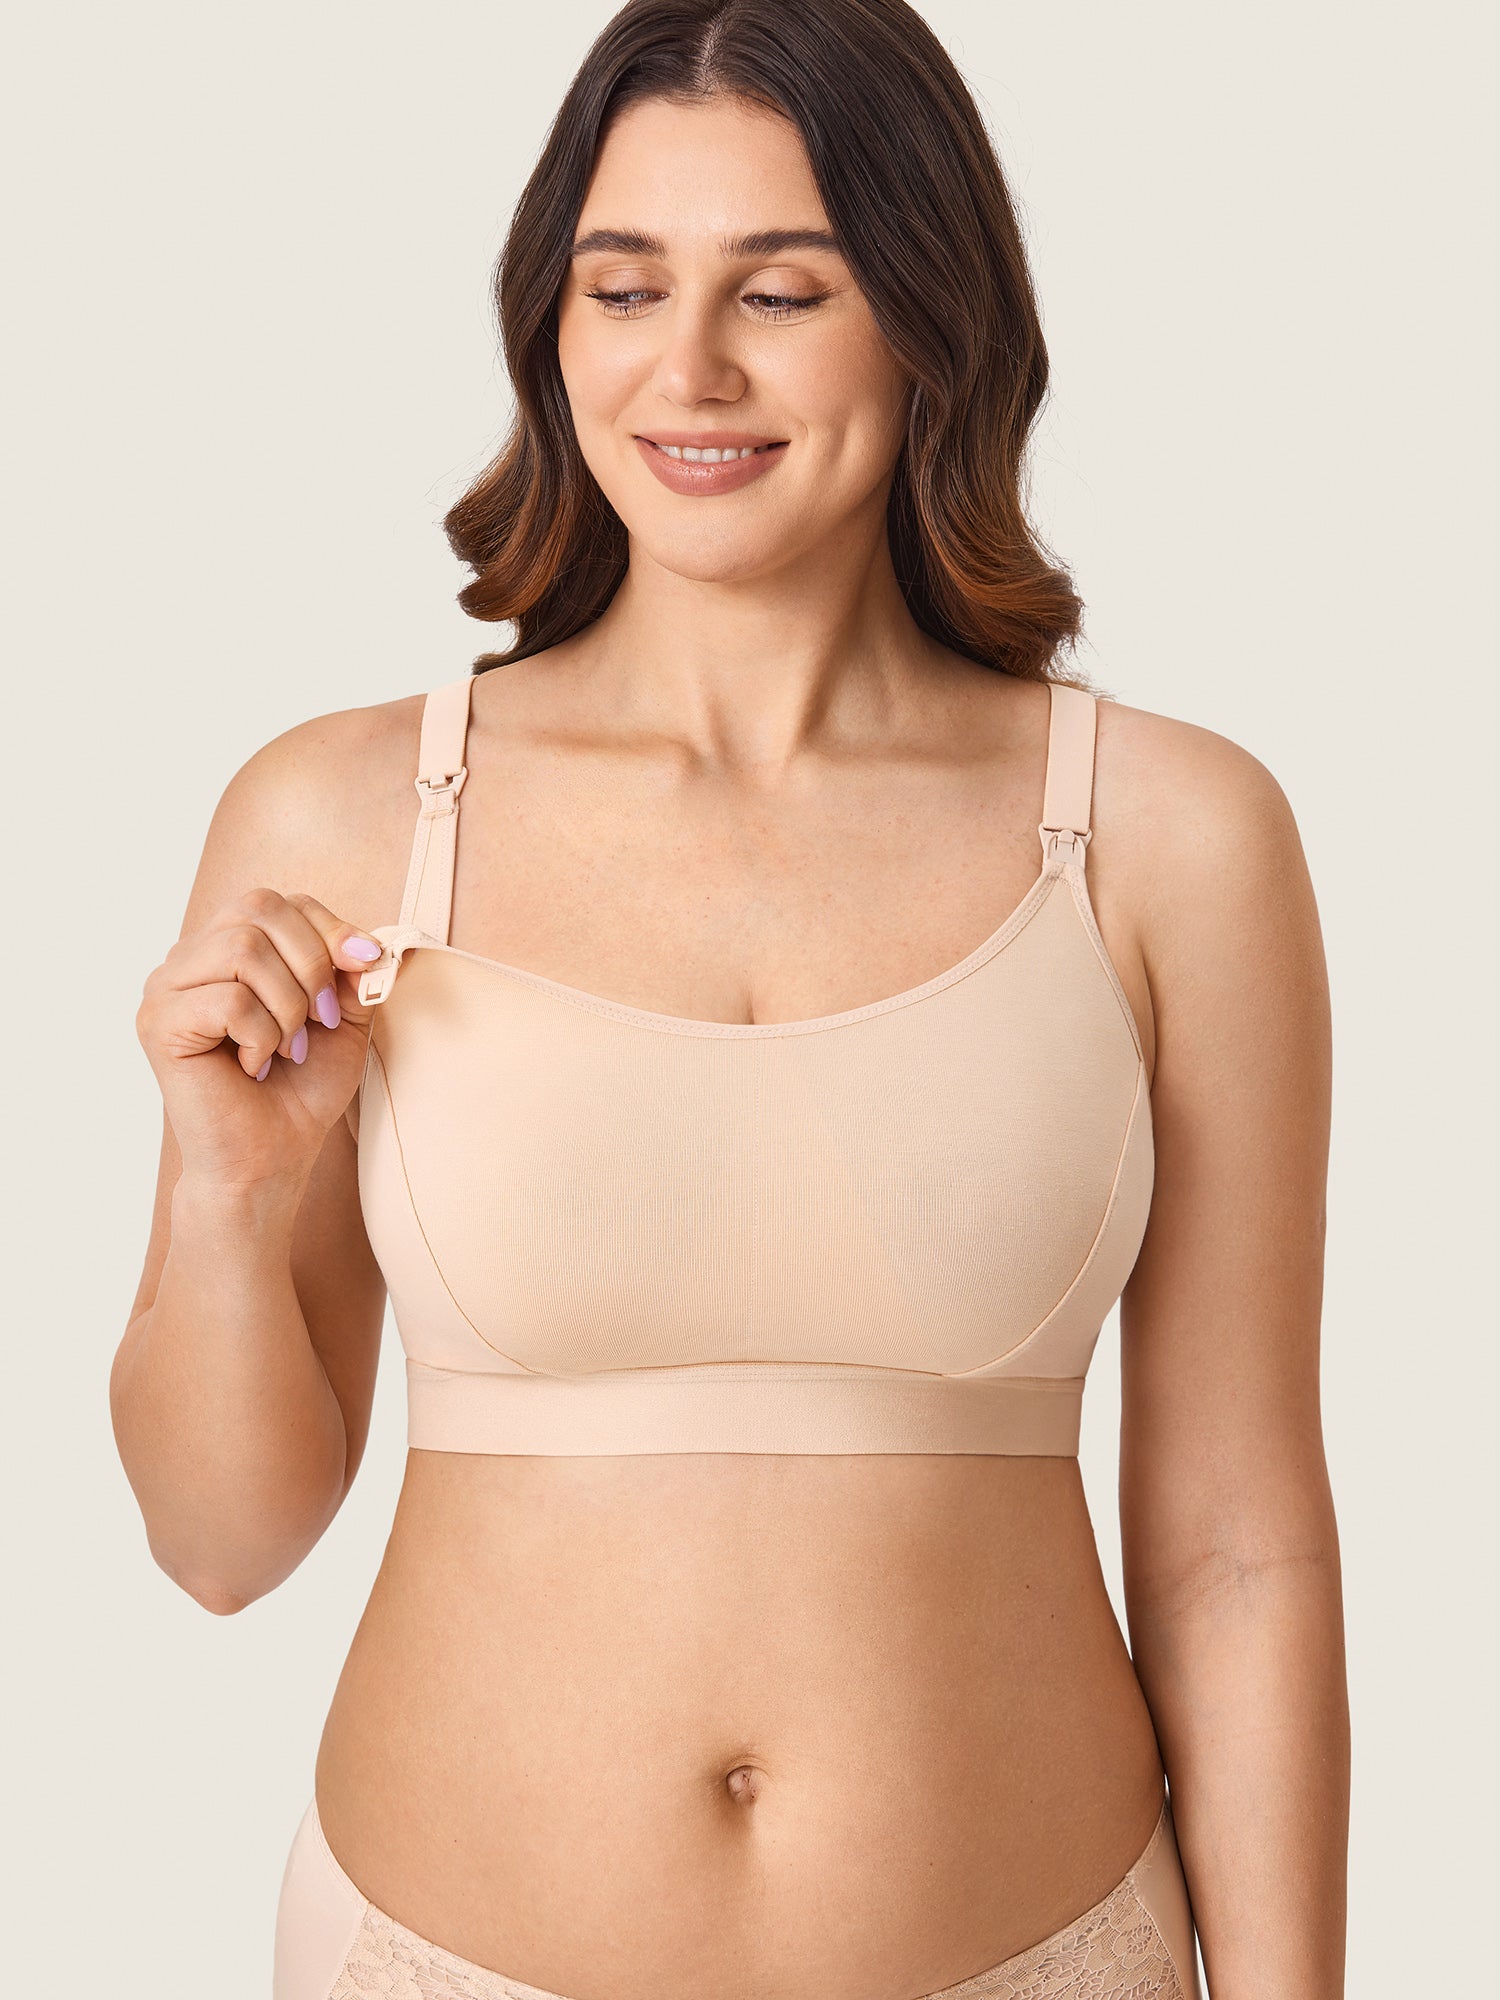 The Best Plus Size Nursing Bras And Plus Size Pumping Bras for